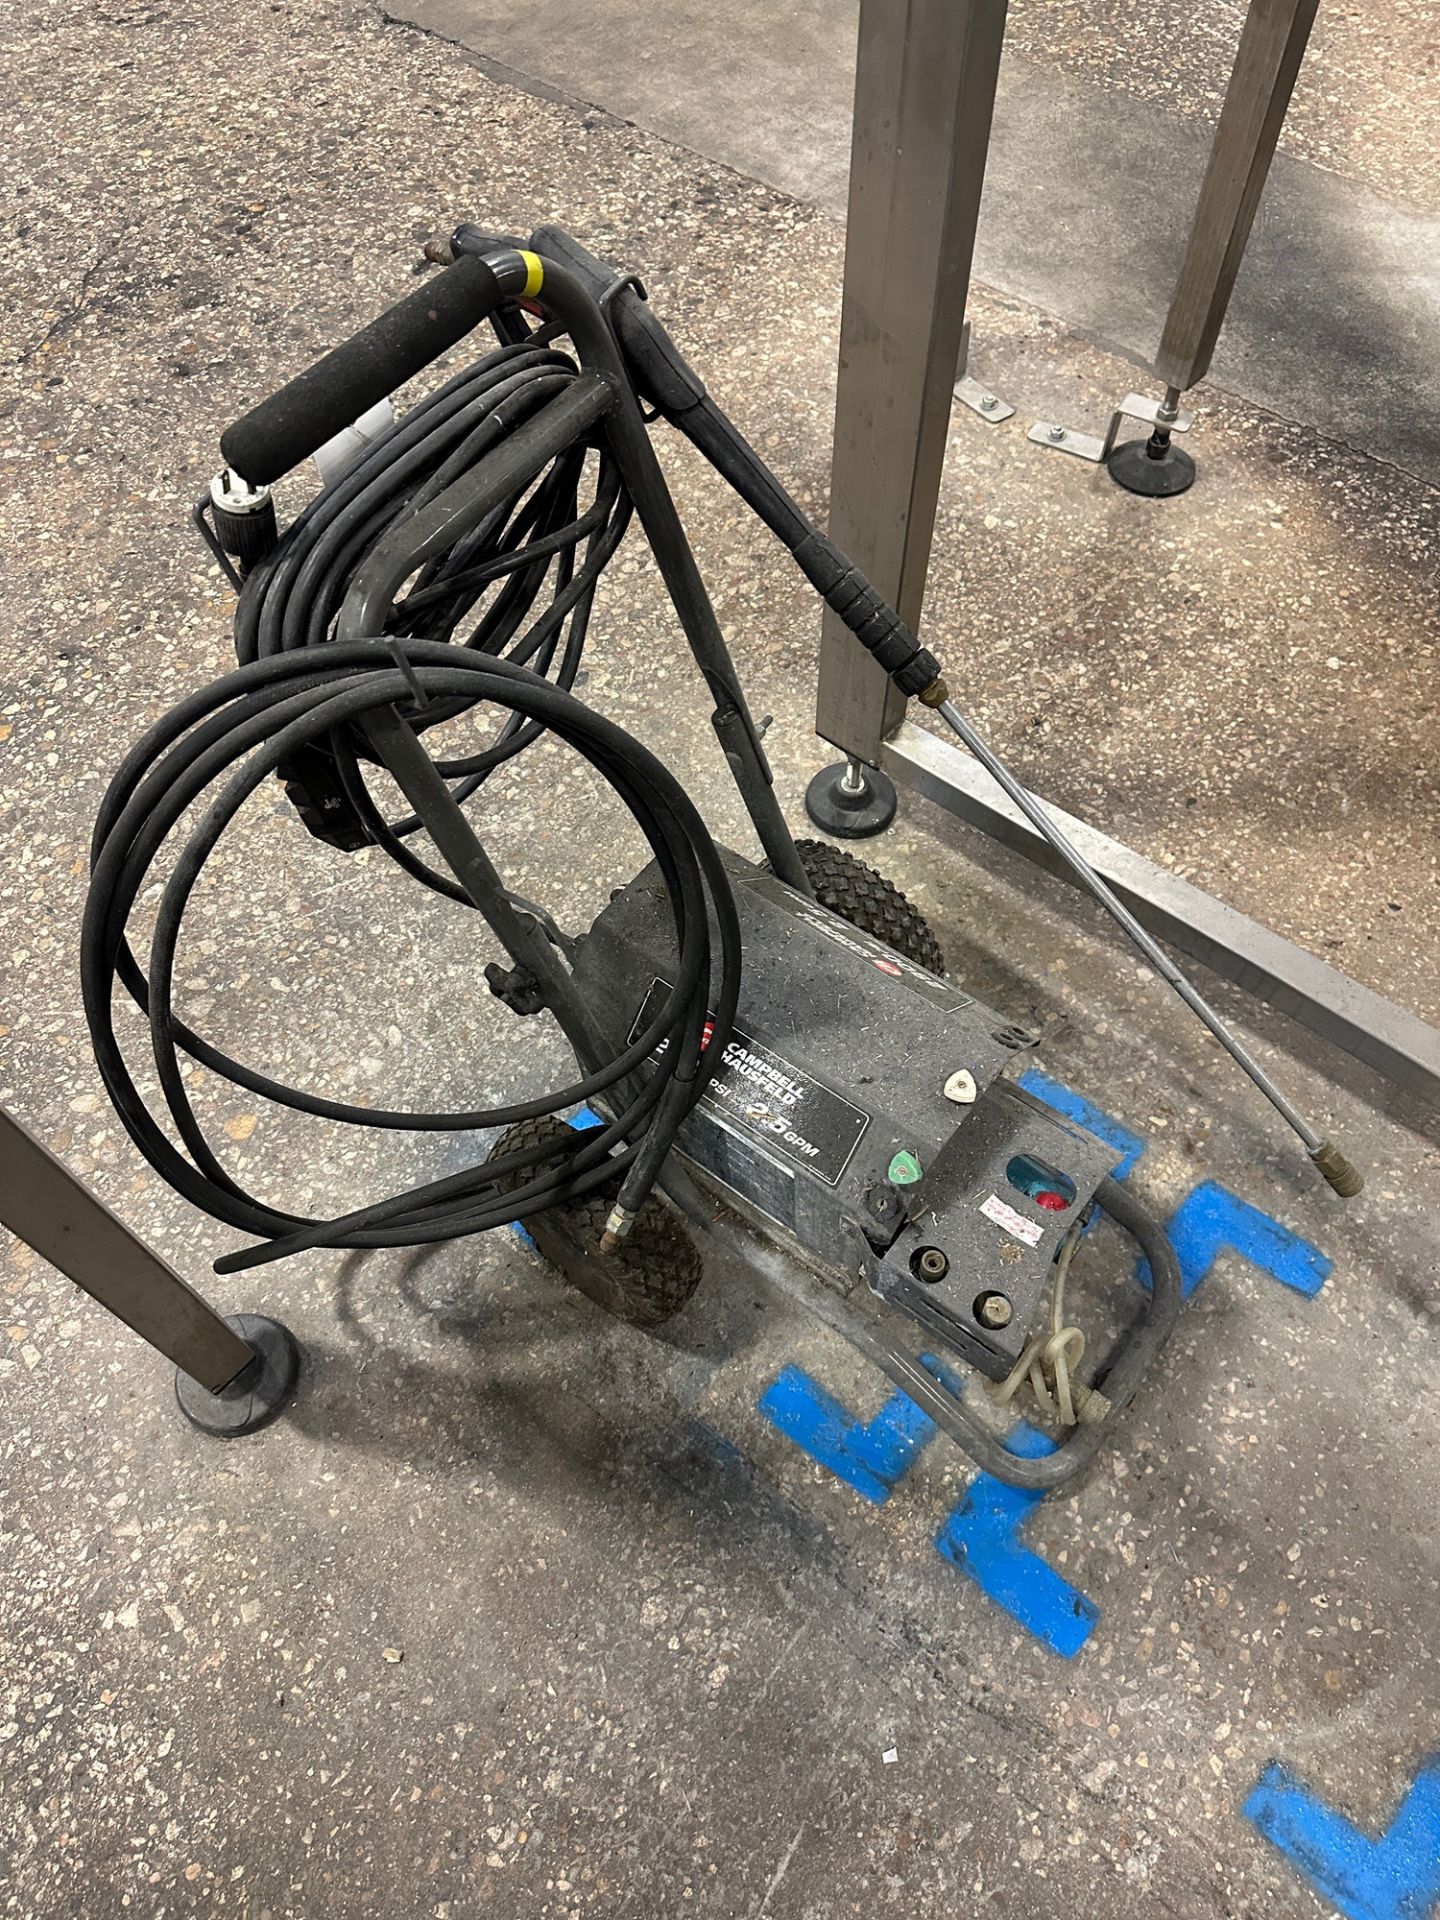 Campbell Hausfield 2900 PSI Power Washer | Rig Fee $25